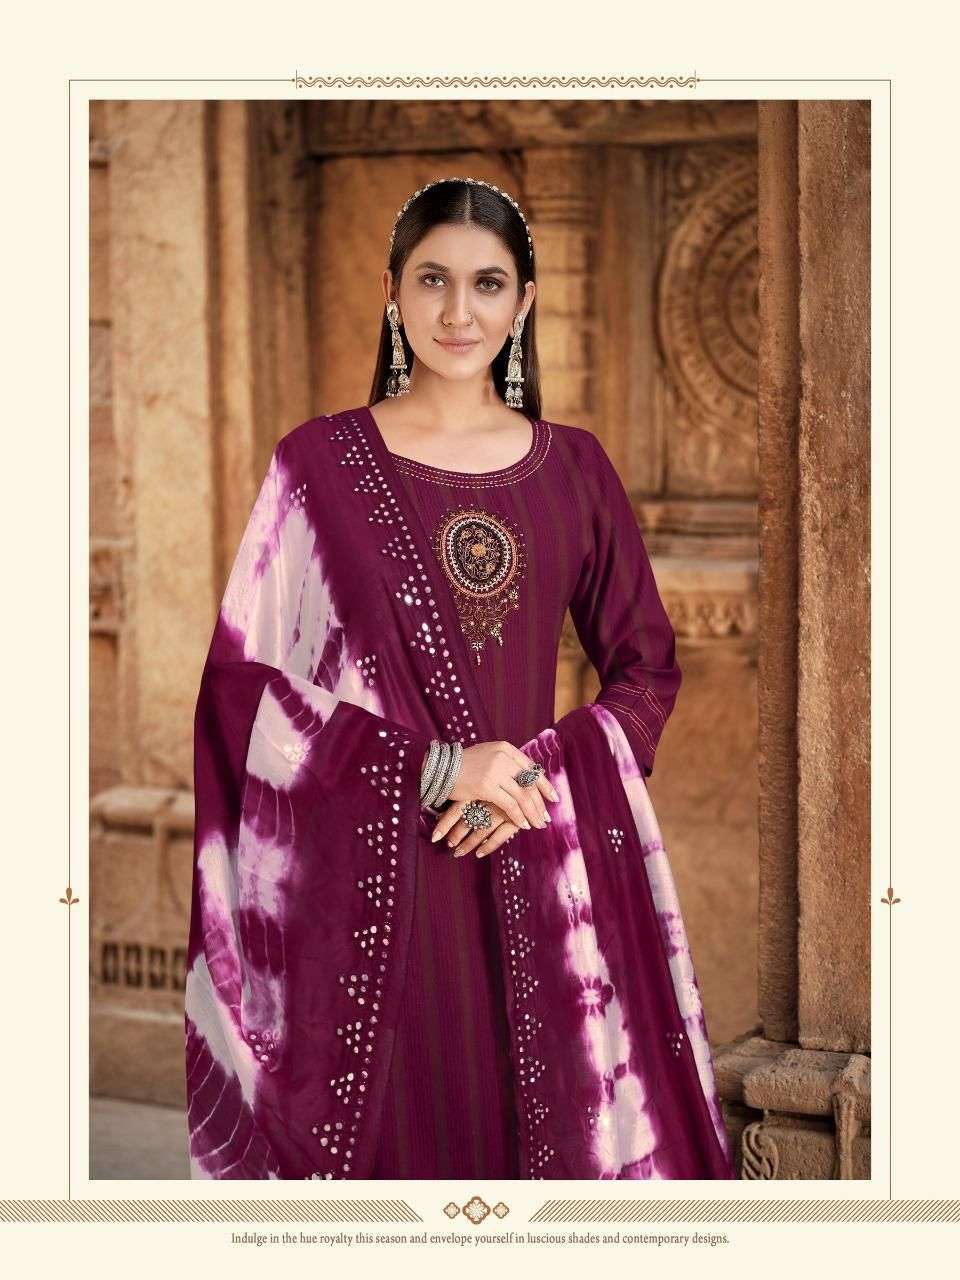 mittoo life style 7007-7012 series exclusive ready made salwar kameez mittoo wholesaler online shopping surat 